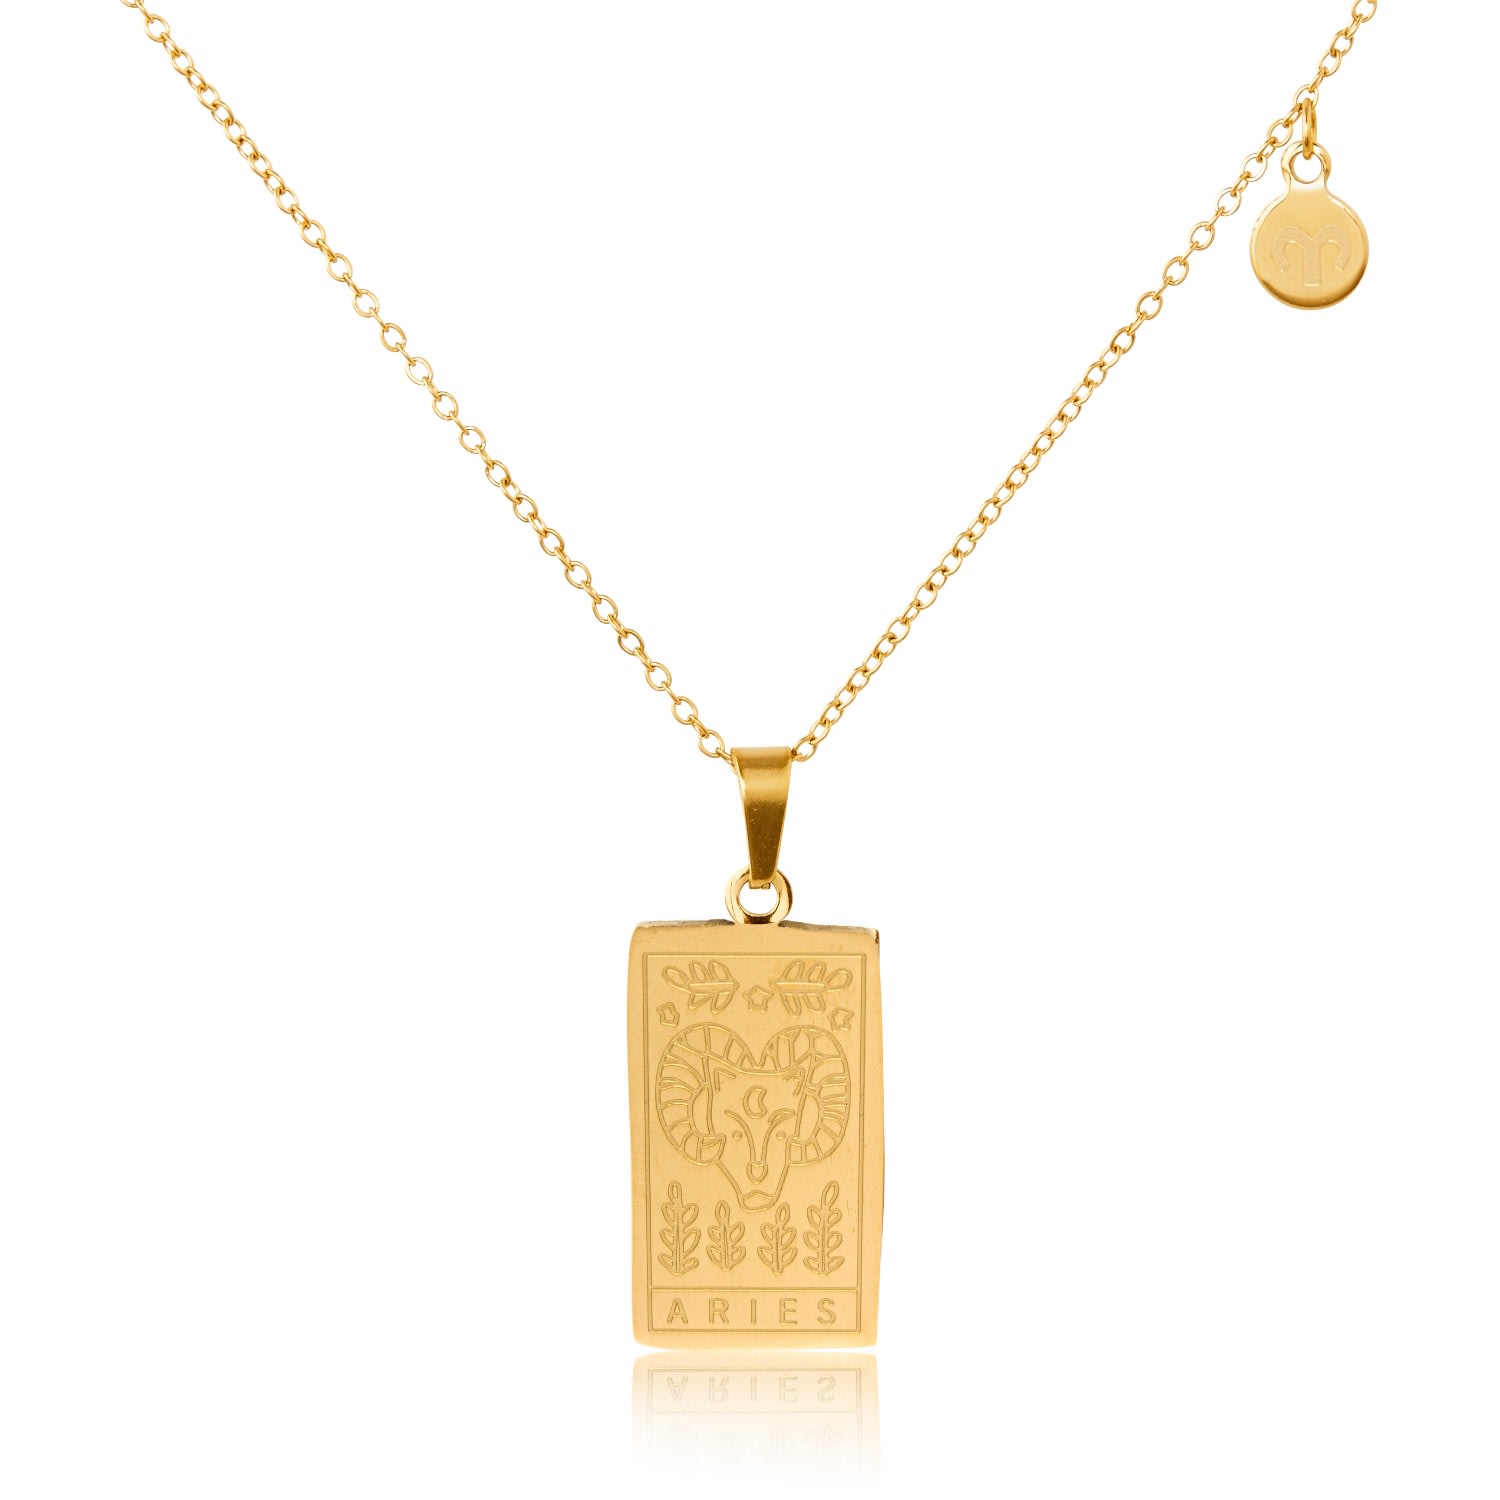 Arctic Fox & Co. Women's Gold Zodiac Star Sign Necklace - Aries